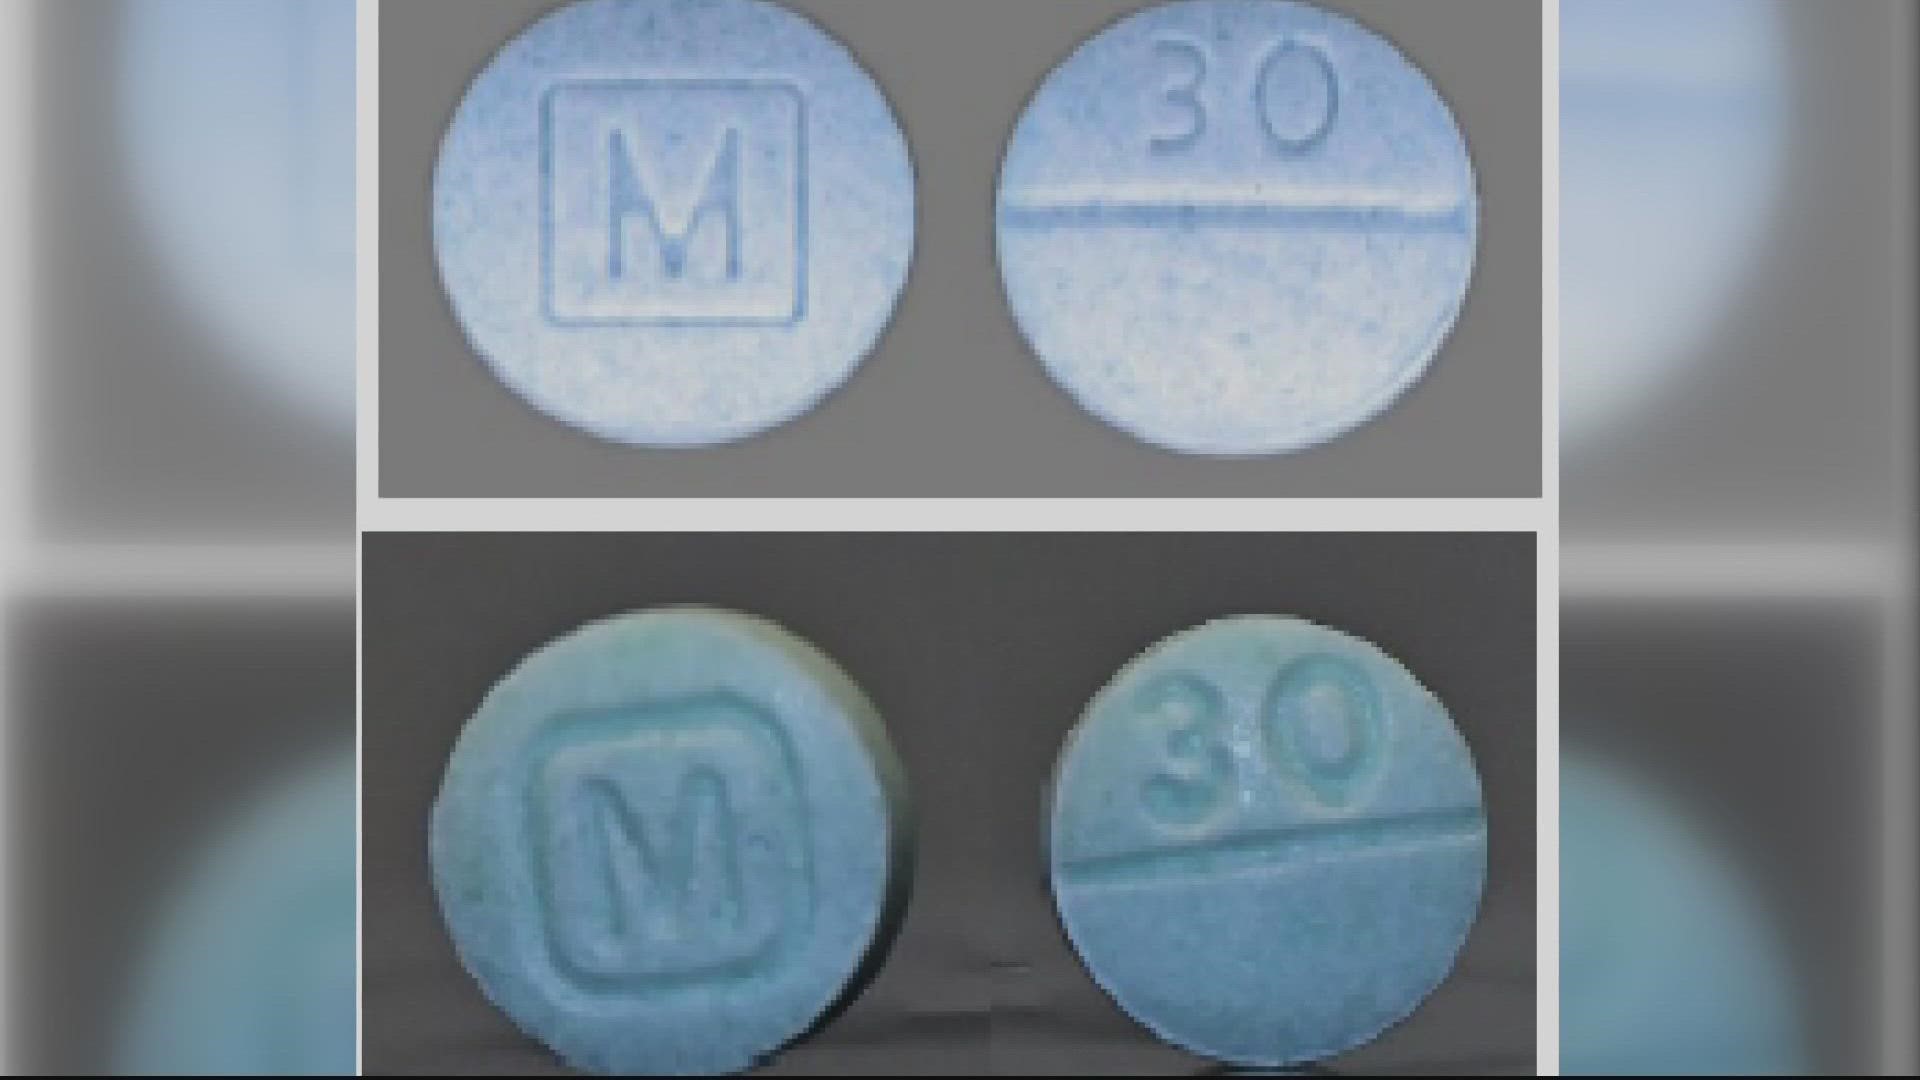 Portland police said both of the teens had similar pills on them when they were found, believed to be counterfeit pills commonly called "M30s."